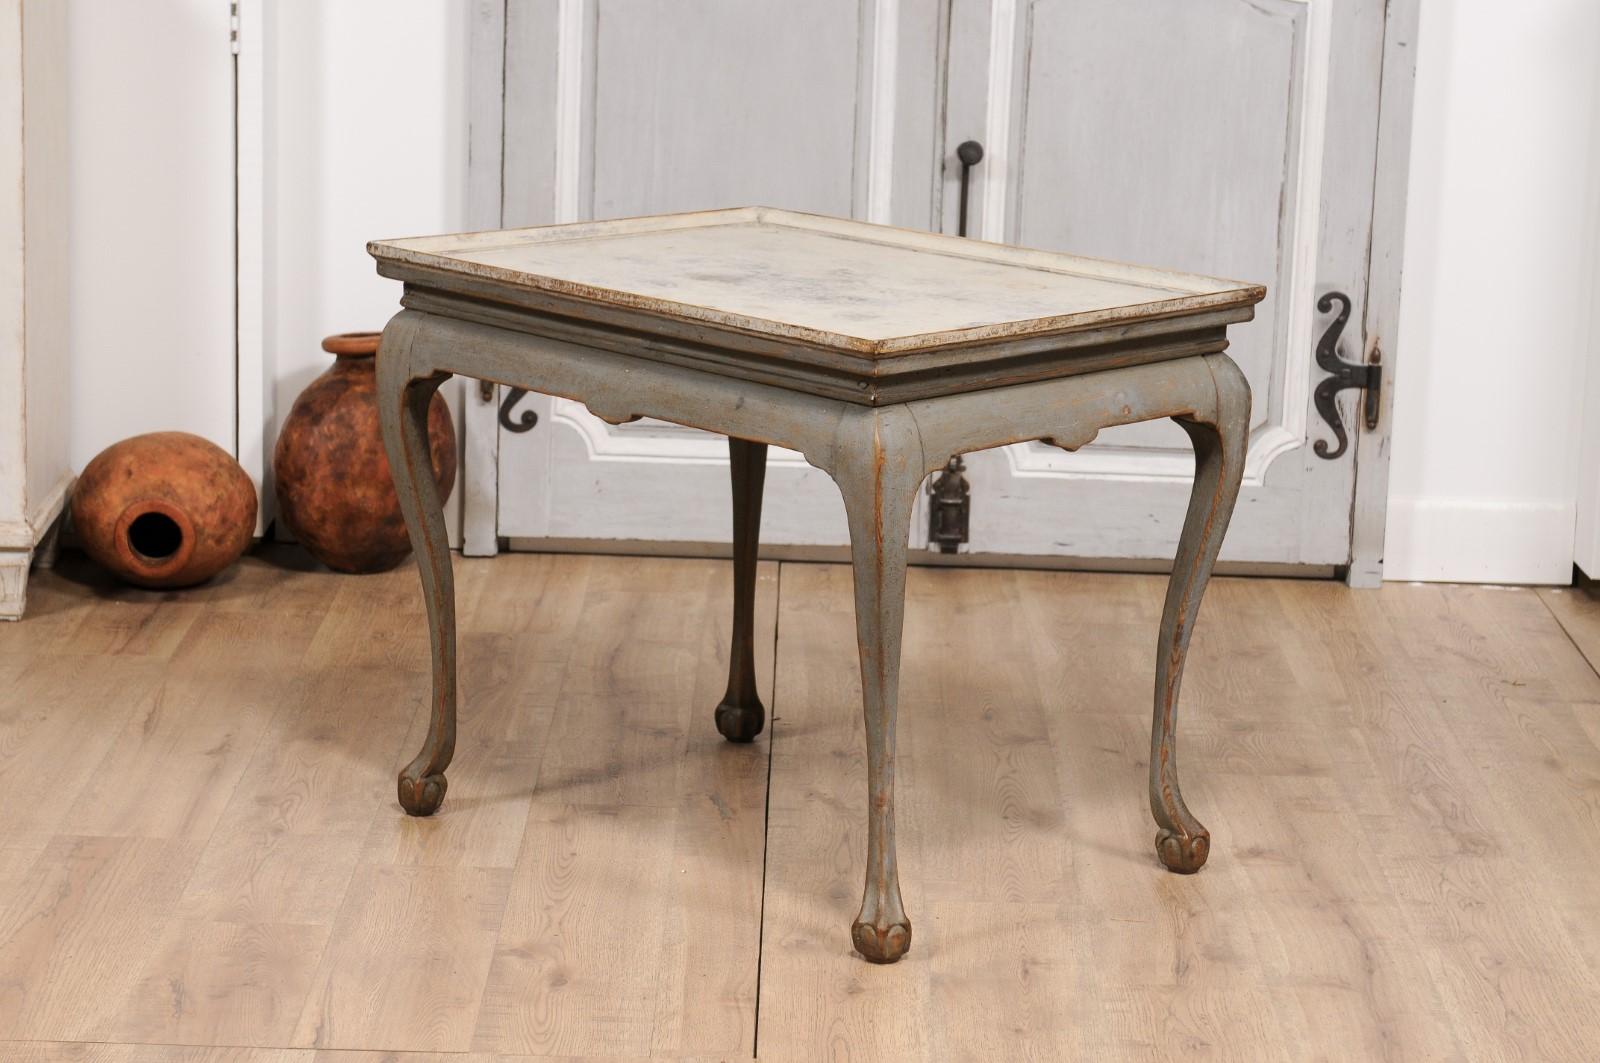 A Swedish Rococo period tea table from circa 1750 with gray painted finish, tray top, cabriole legs and ball and claw feet. Exuding timeless elegance, this Swedish Rococo period tea table from circa 1750 is an elegant testament to European